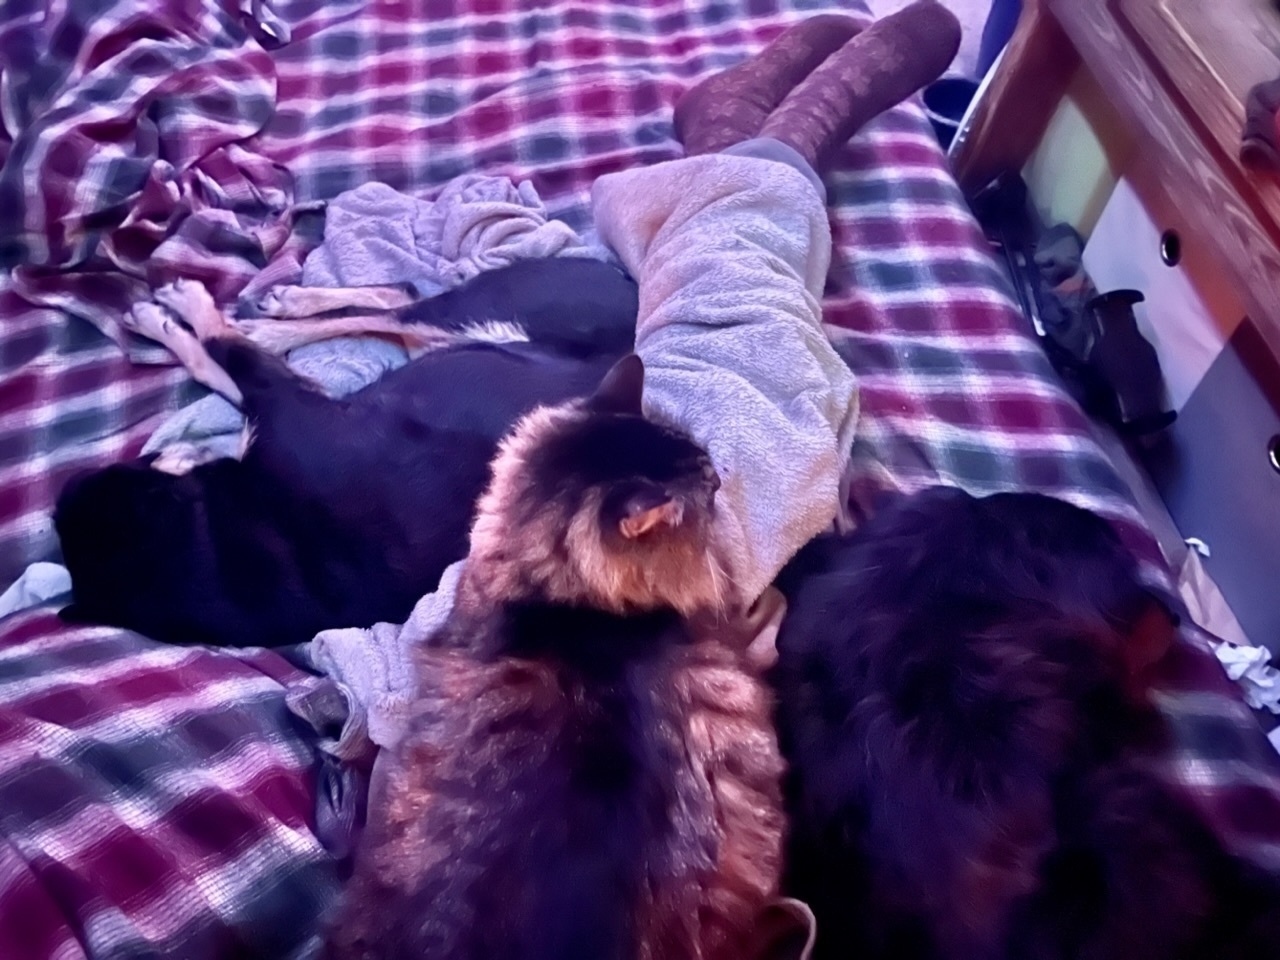 Laying on a futon, I am surrounded by two dogs and a cat covering my lap